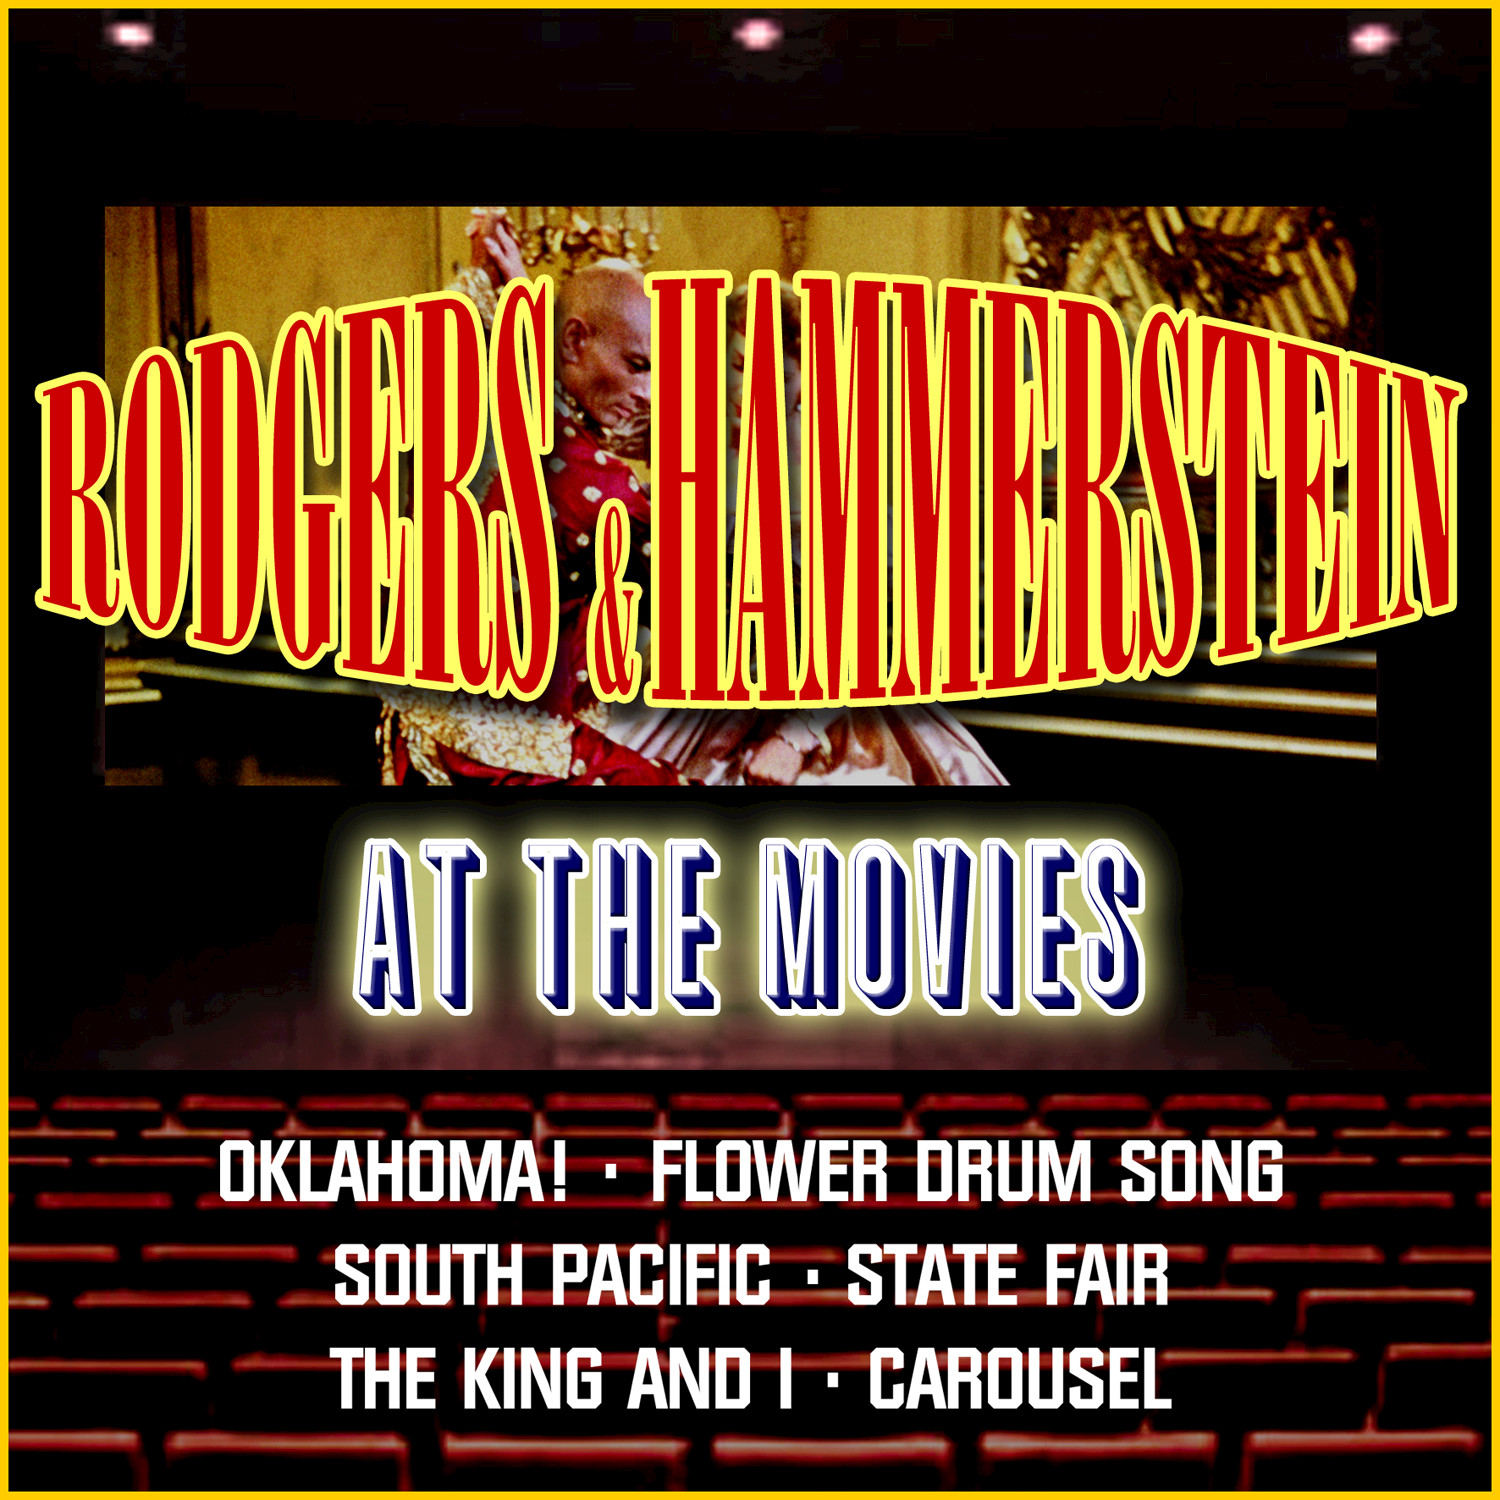 Rodgers & Hammerstein at the Movies